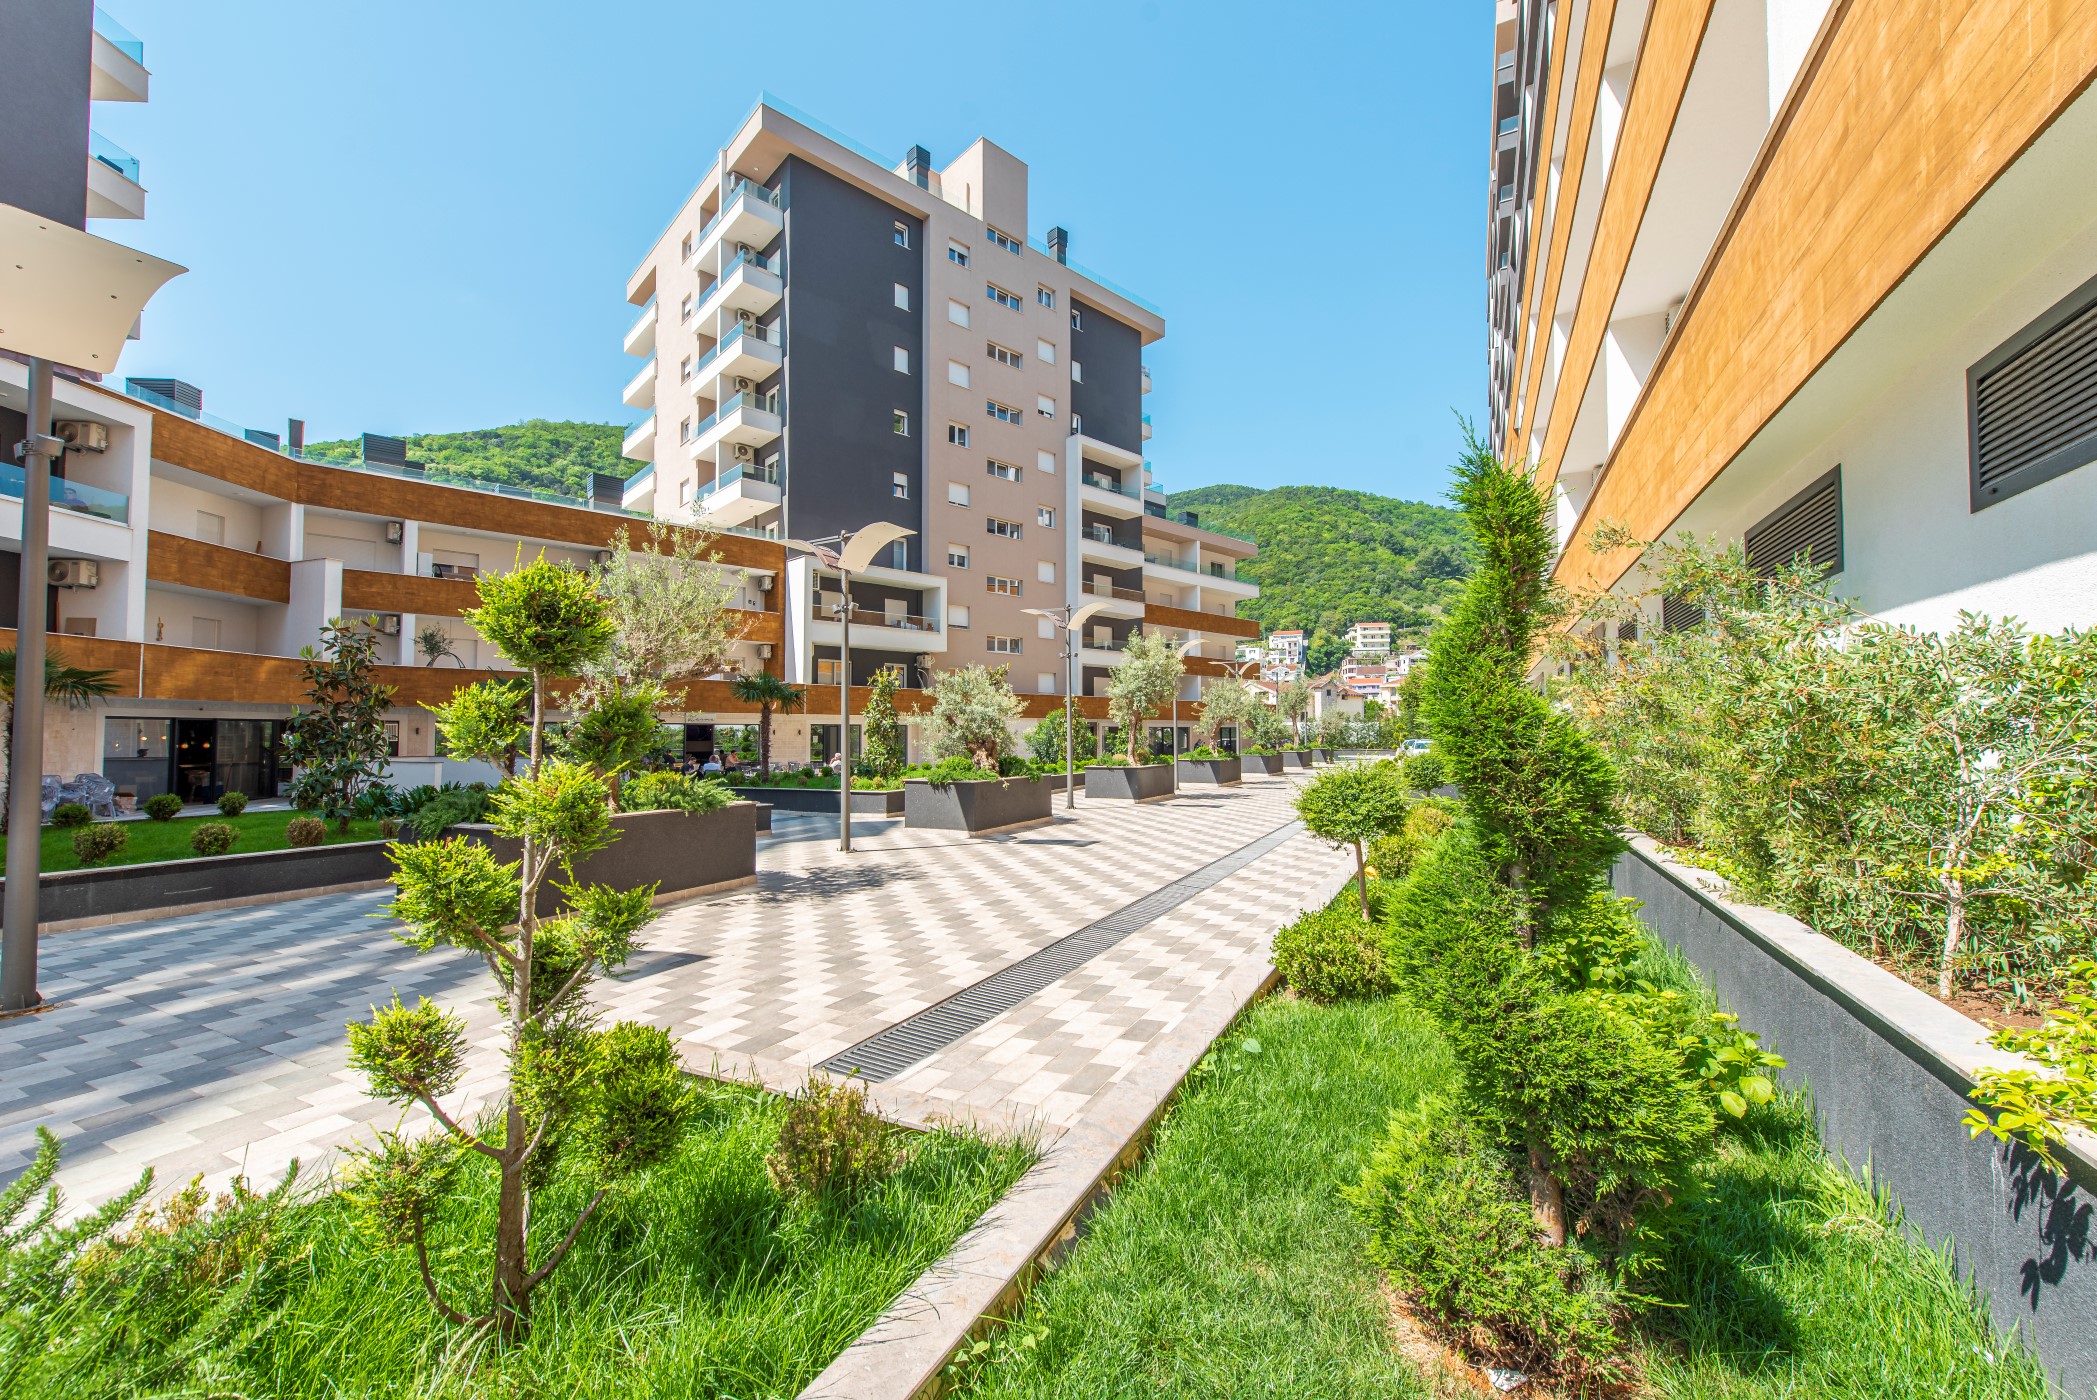 Budva, Old Bakery – modern one-bedroom apartment in the Old Bakery complex